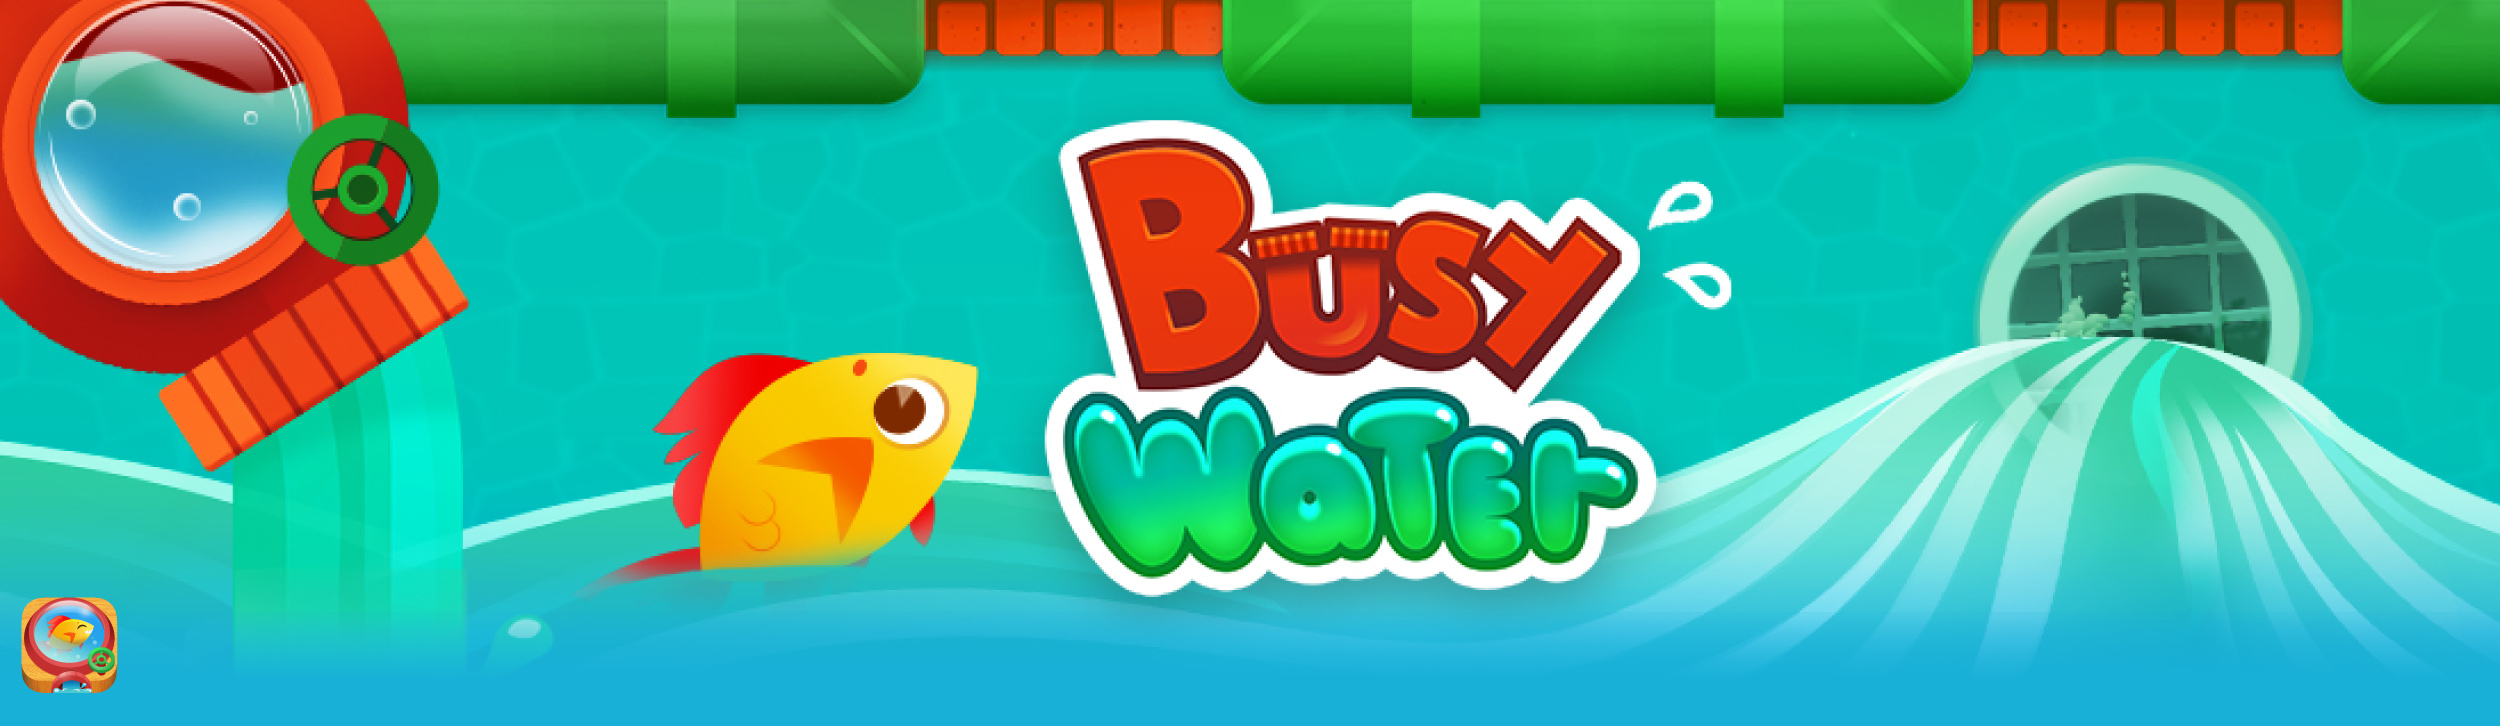 Millimade Busy Water App design